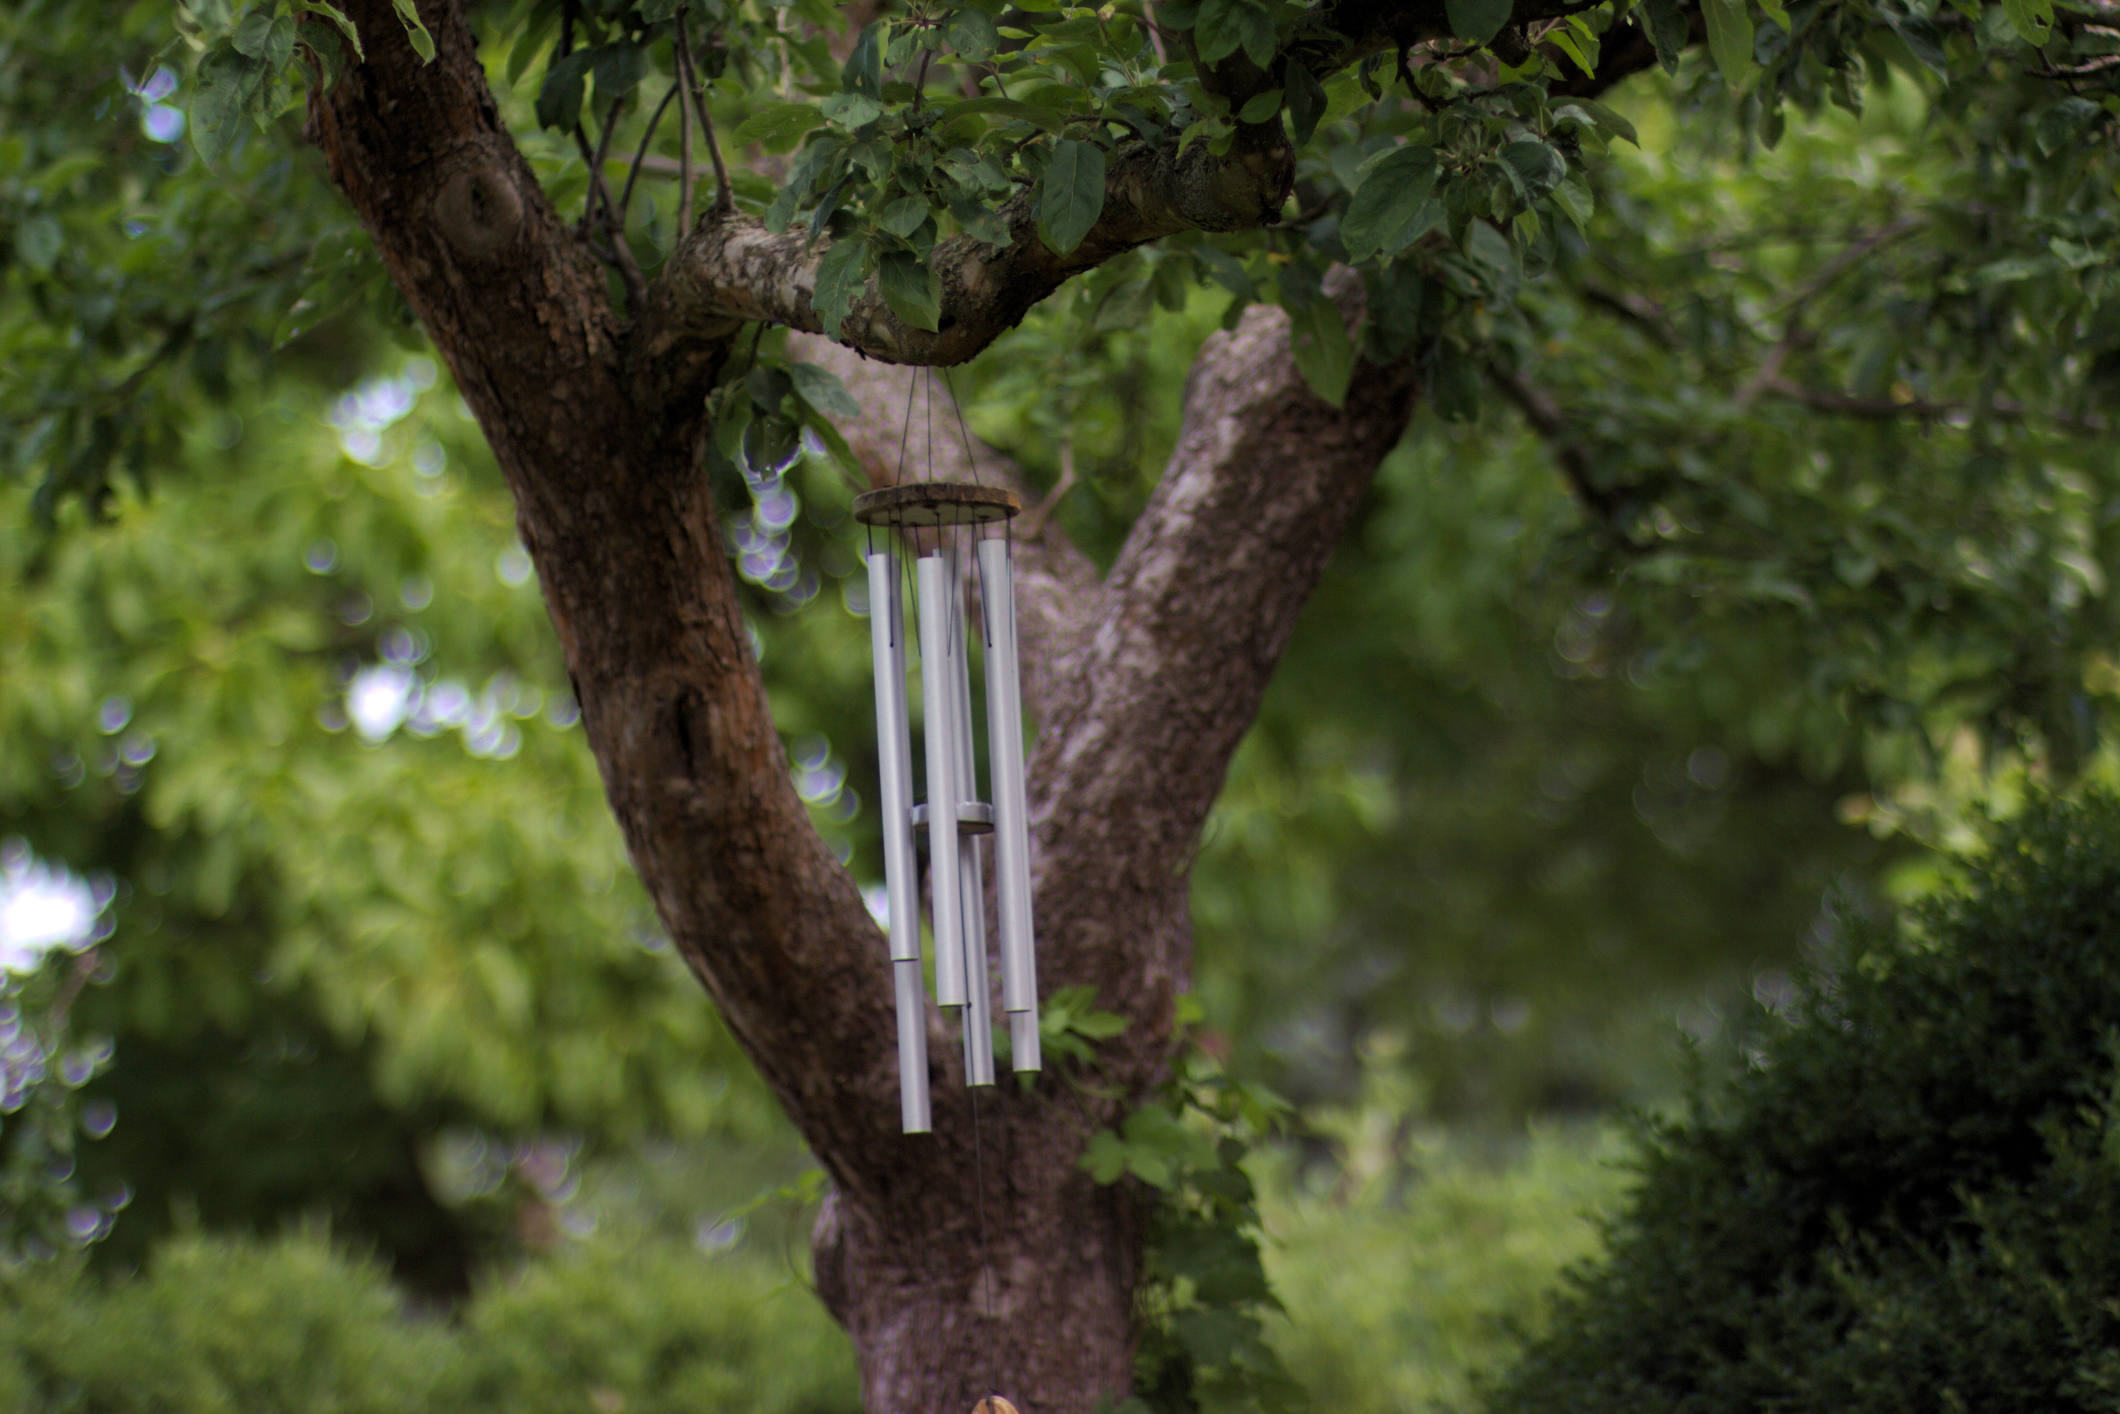 A wind chime on a tree